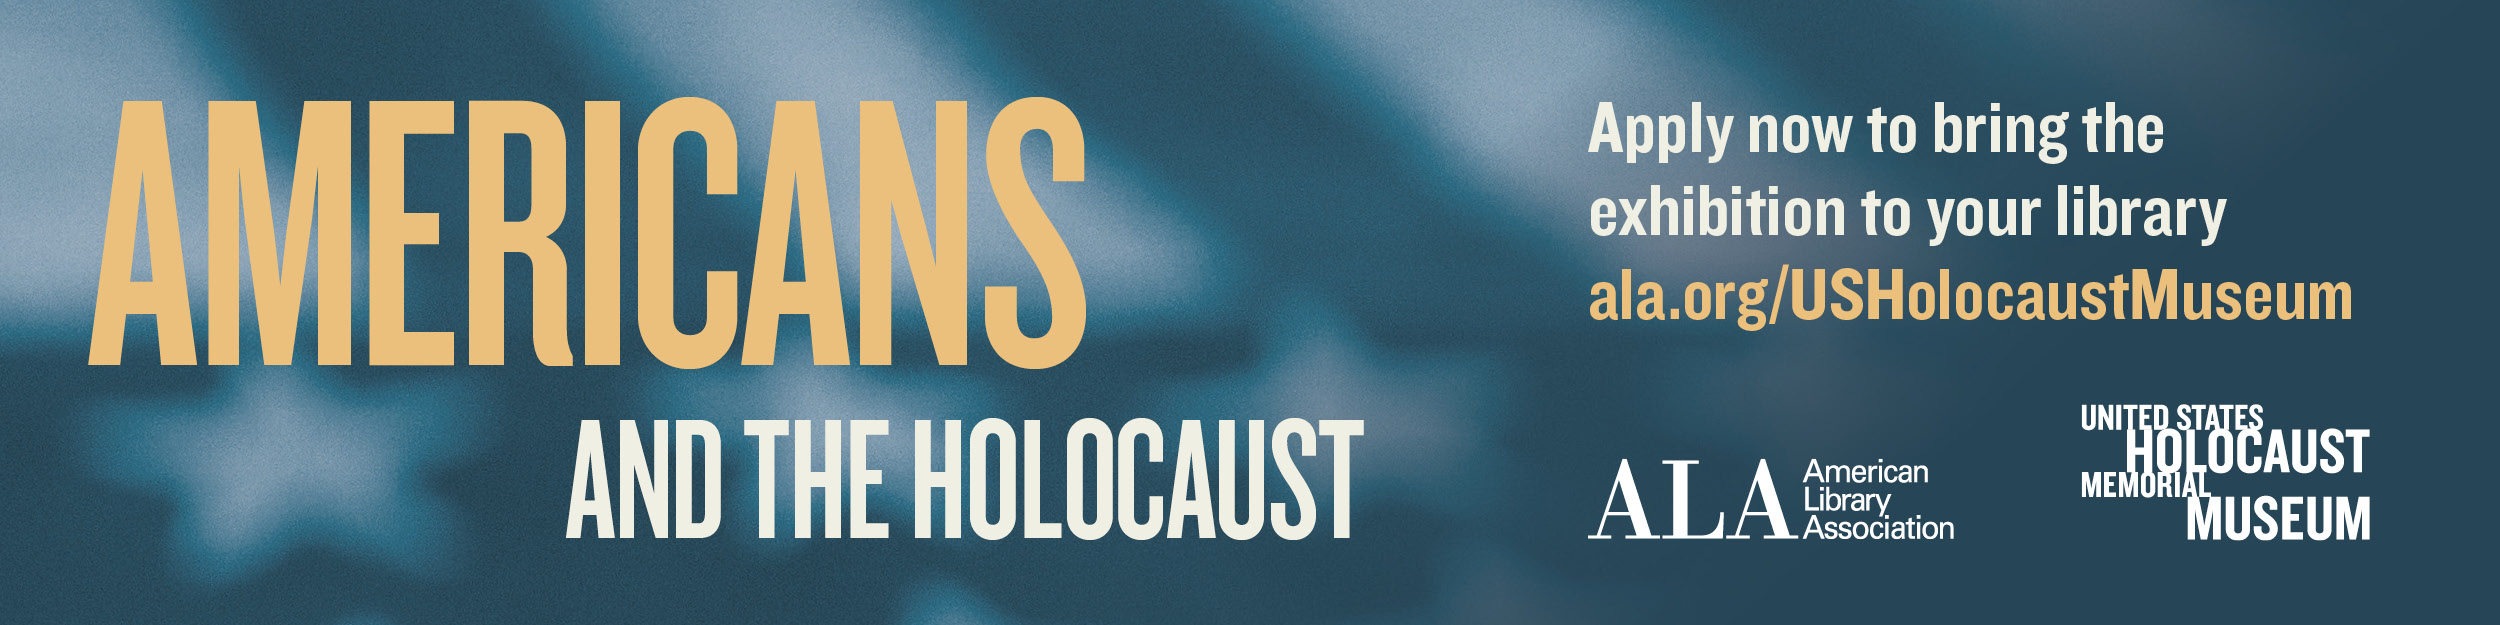 Americans and the Holocaust. Apply now to bring the exhibition to your library. ala.org/USHolocaustMuseum